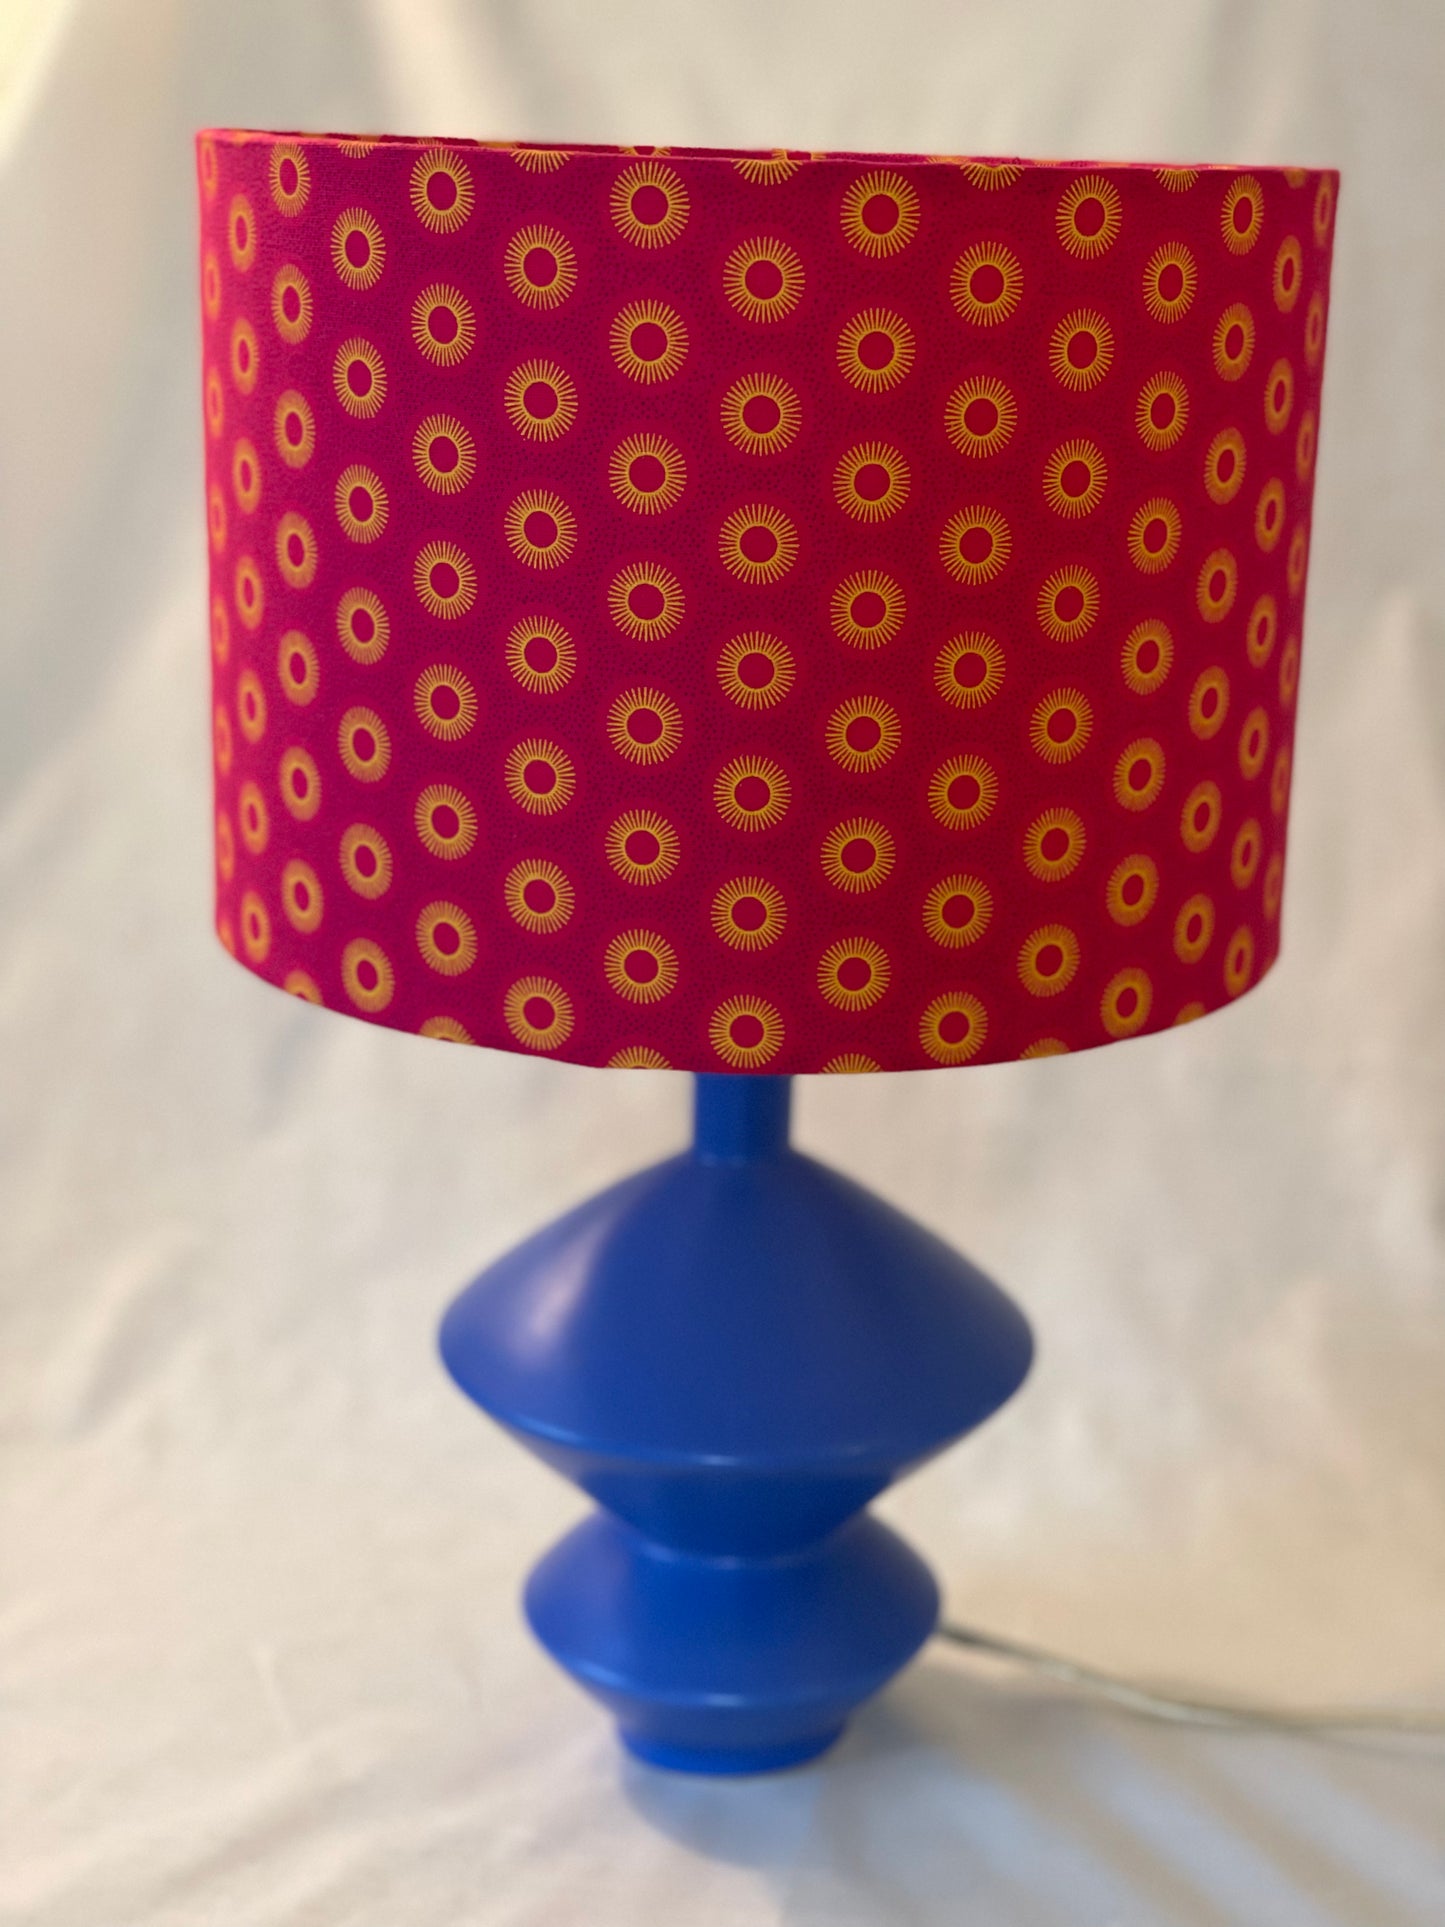 10 inch Drum Lampshade. Dynamic South African Shwe Shwe Print- Hot Pink with Golden Yellow Sun Motif.